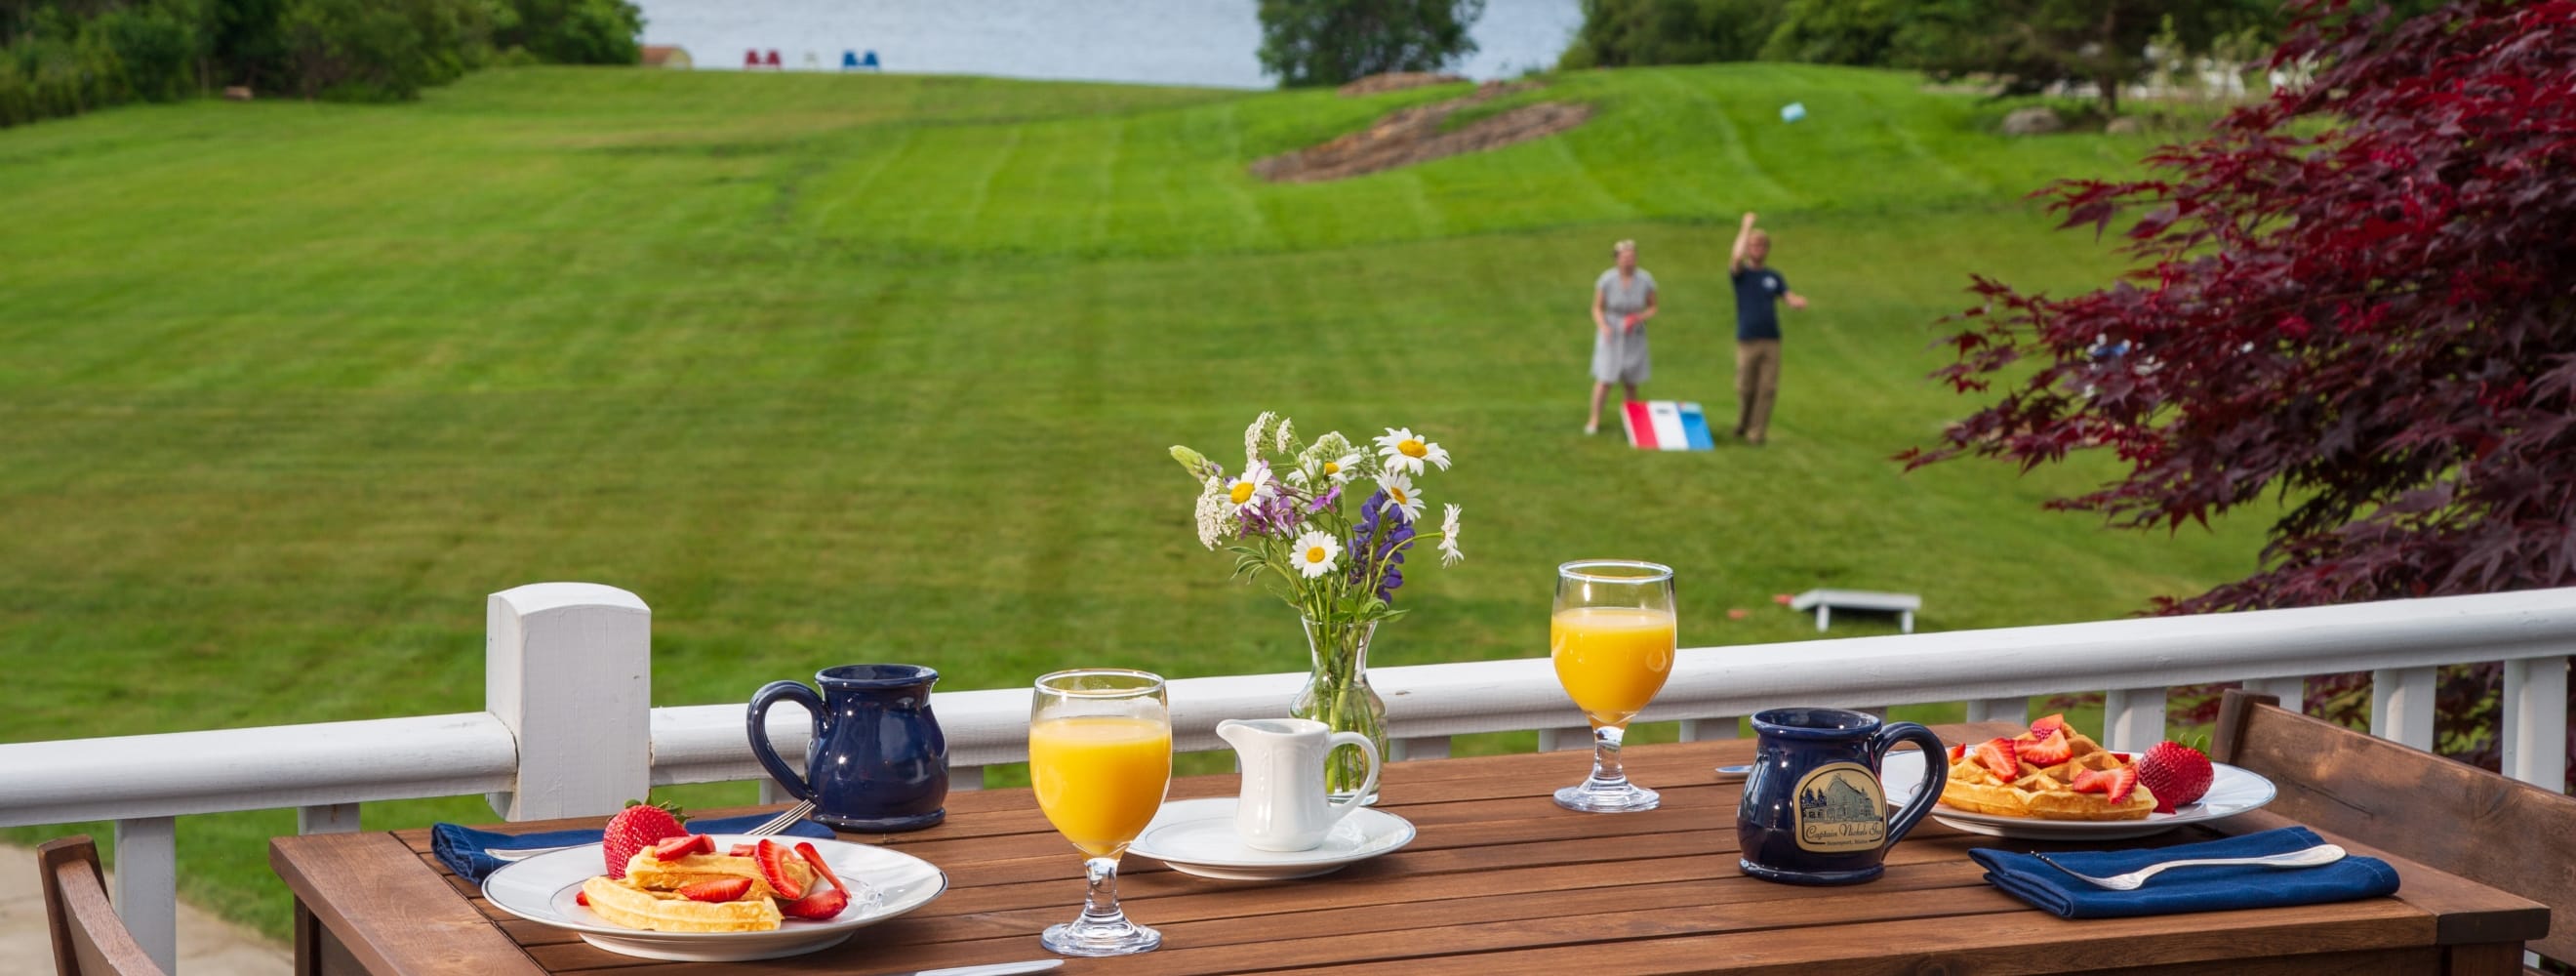 breakfast on tables with couple playing cornhole in the background